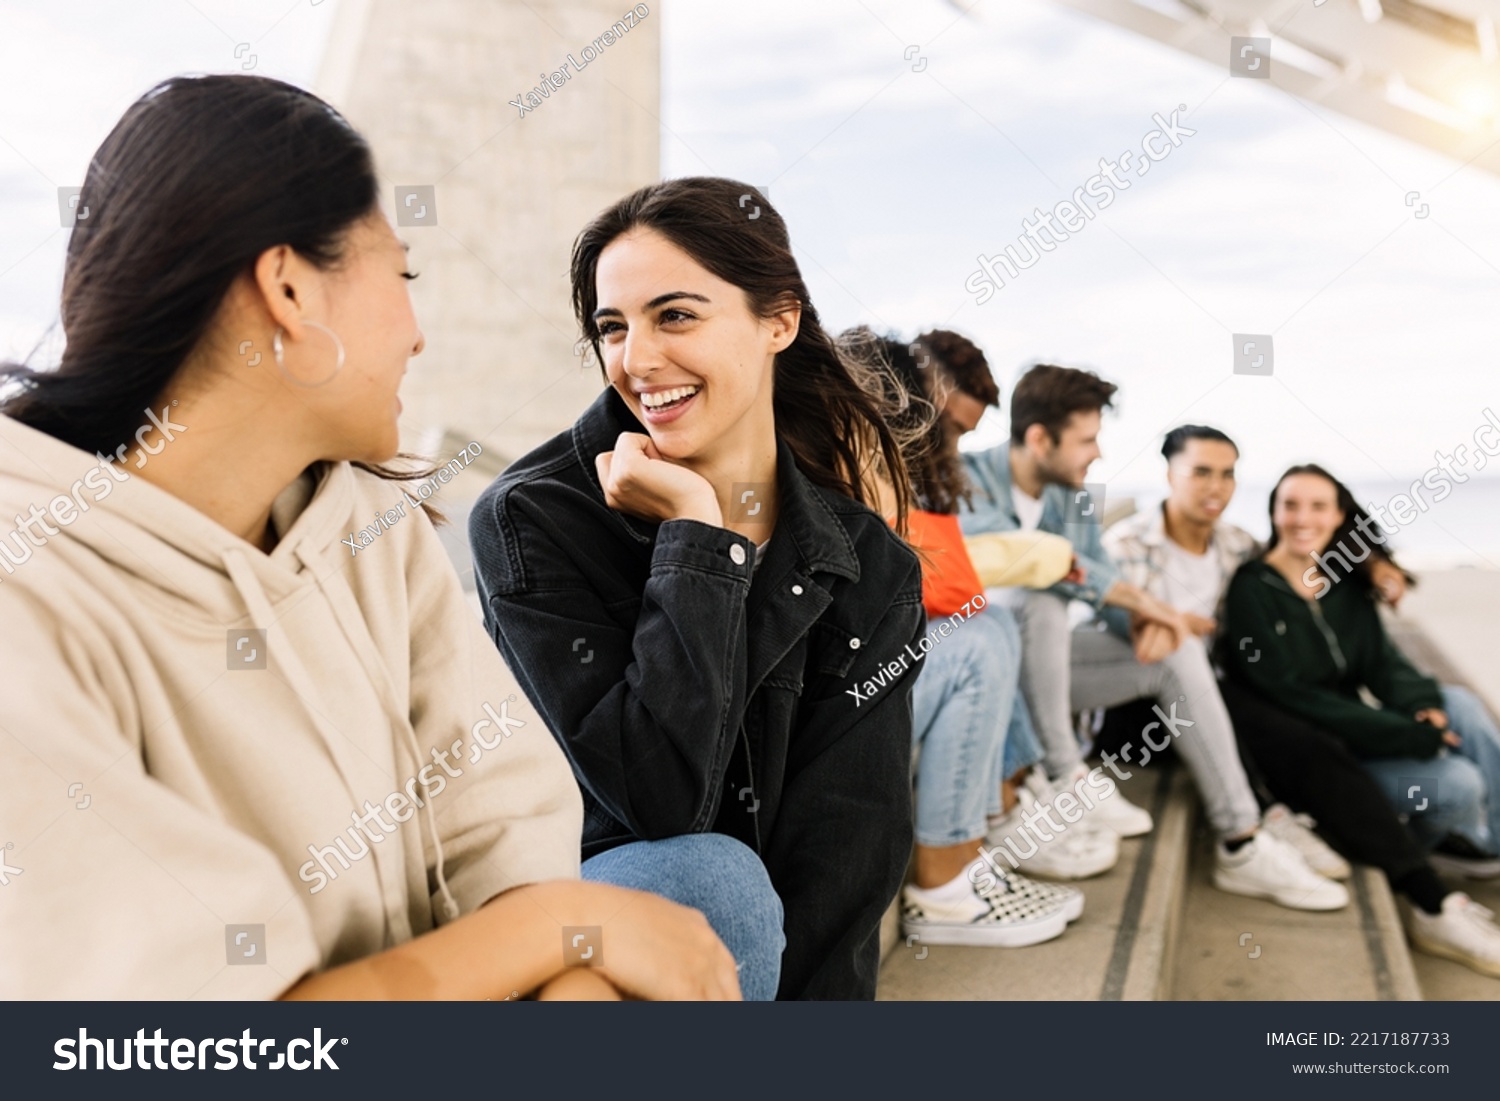 Happy young group of multiracial friends hanging out together outdoors - Millennial diverse people social gathering relaxing in city street - Focus on pretty caucasian woman #2217187733